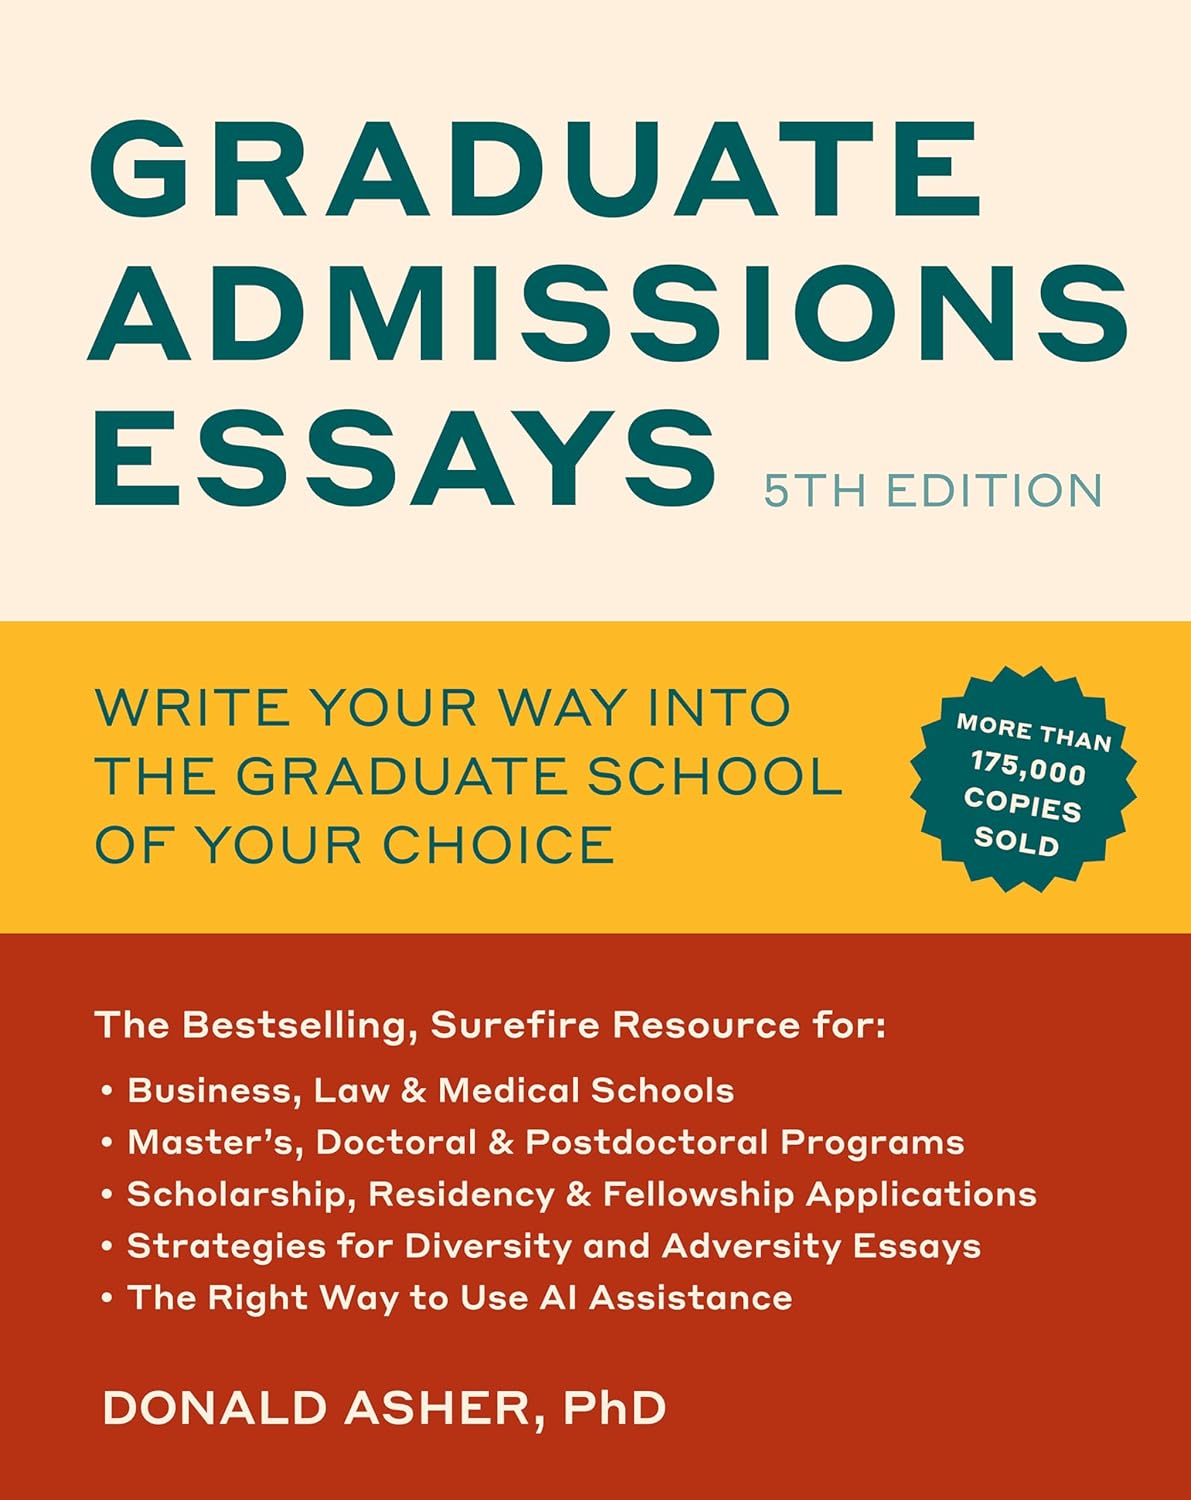 GRADUATE ADMISSIONS ESSAYS: WRITE YOUR WAY INTO THE GRADUATE SCHOOL OF YOUR CHOICE